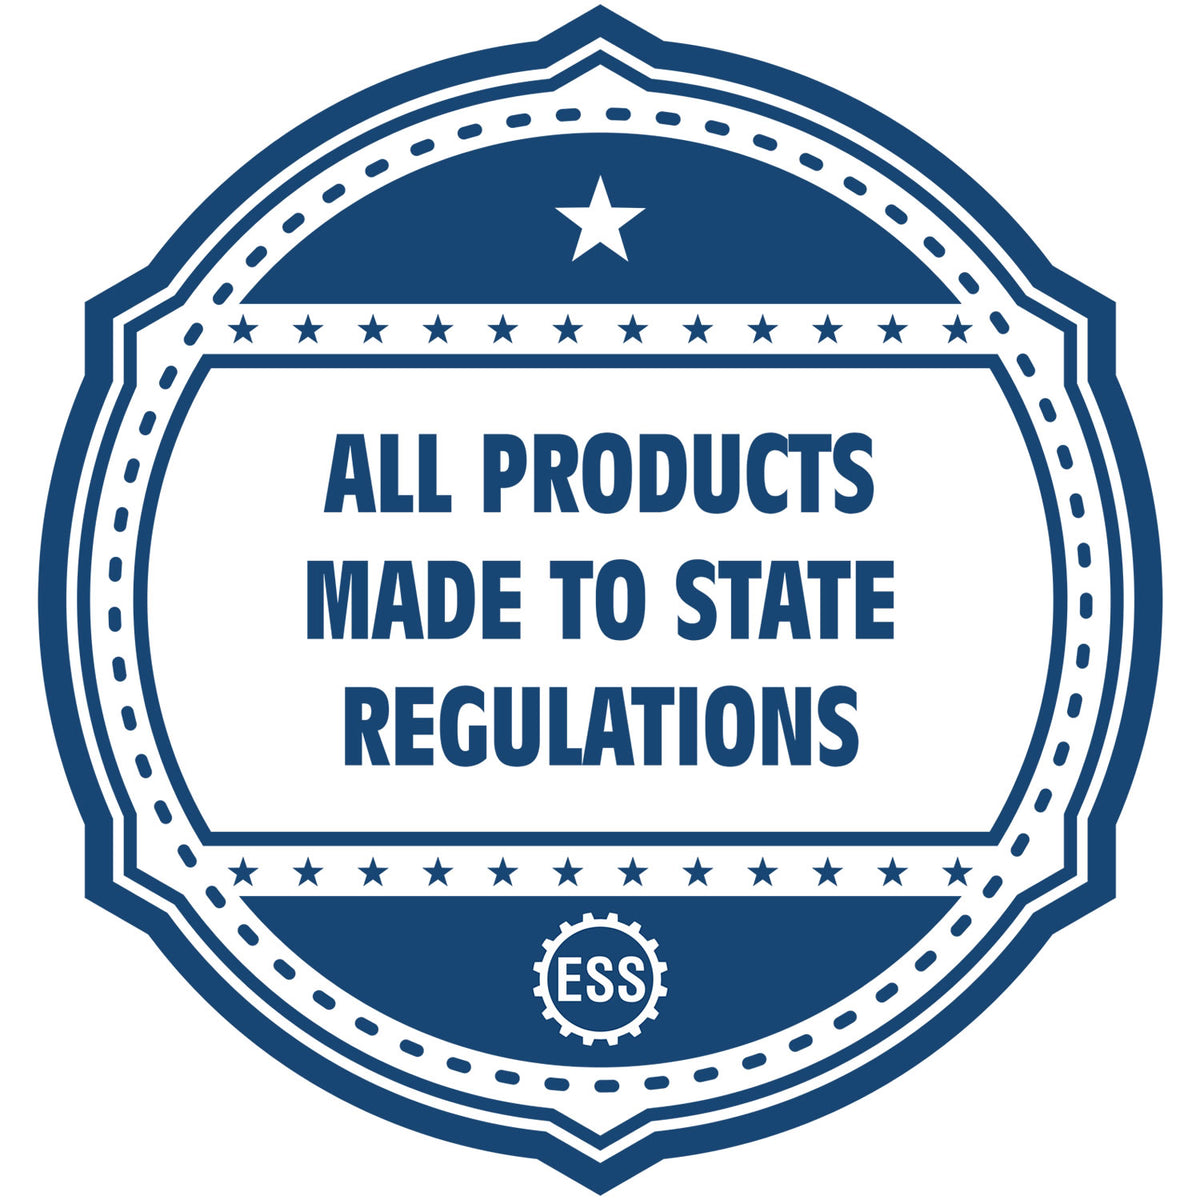 An icon or badge element for the Guam Desk Surveyor Seal Embosser showing that this product is made in compliance with state regulations.